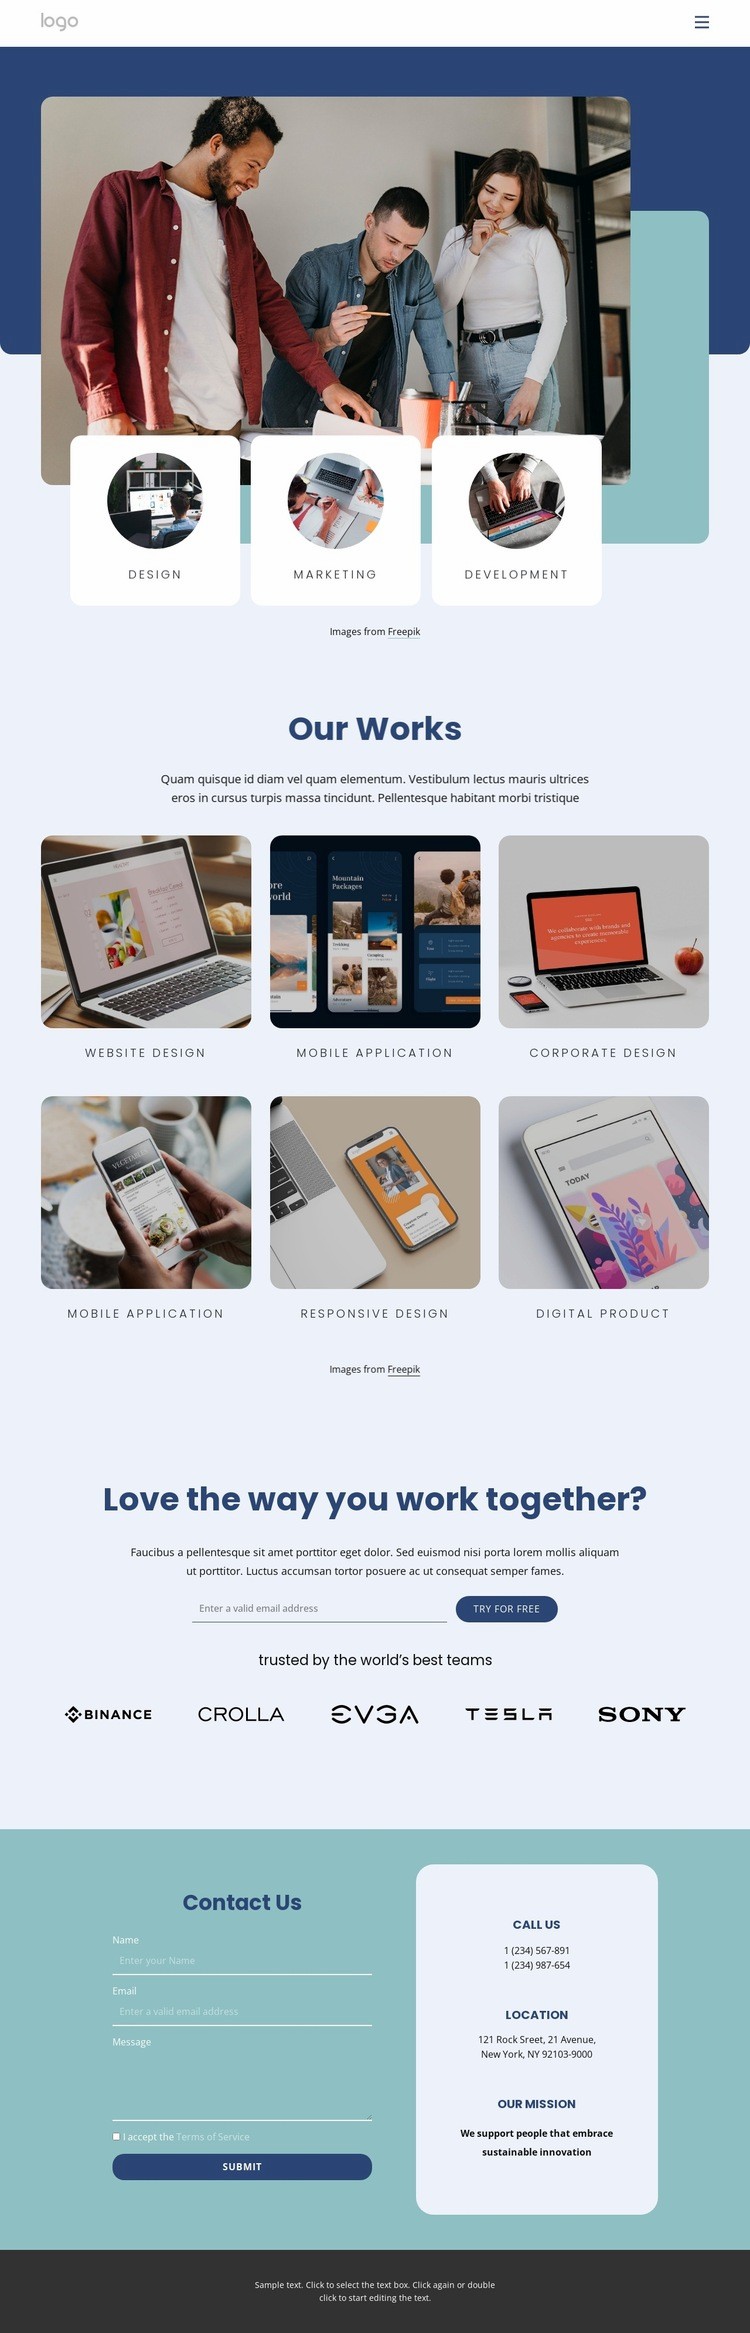 We want you to grow with us Homepage Design